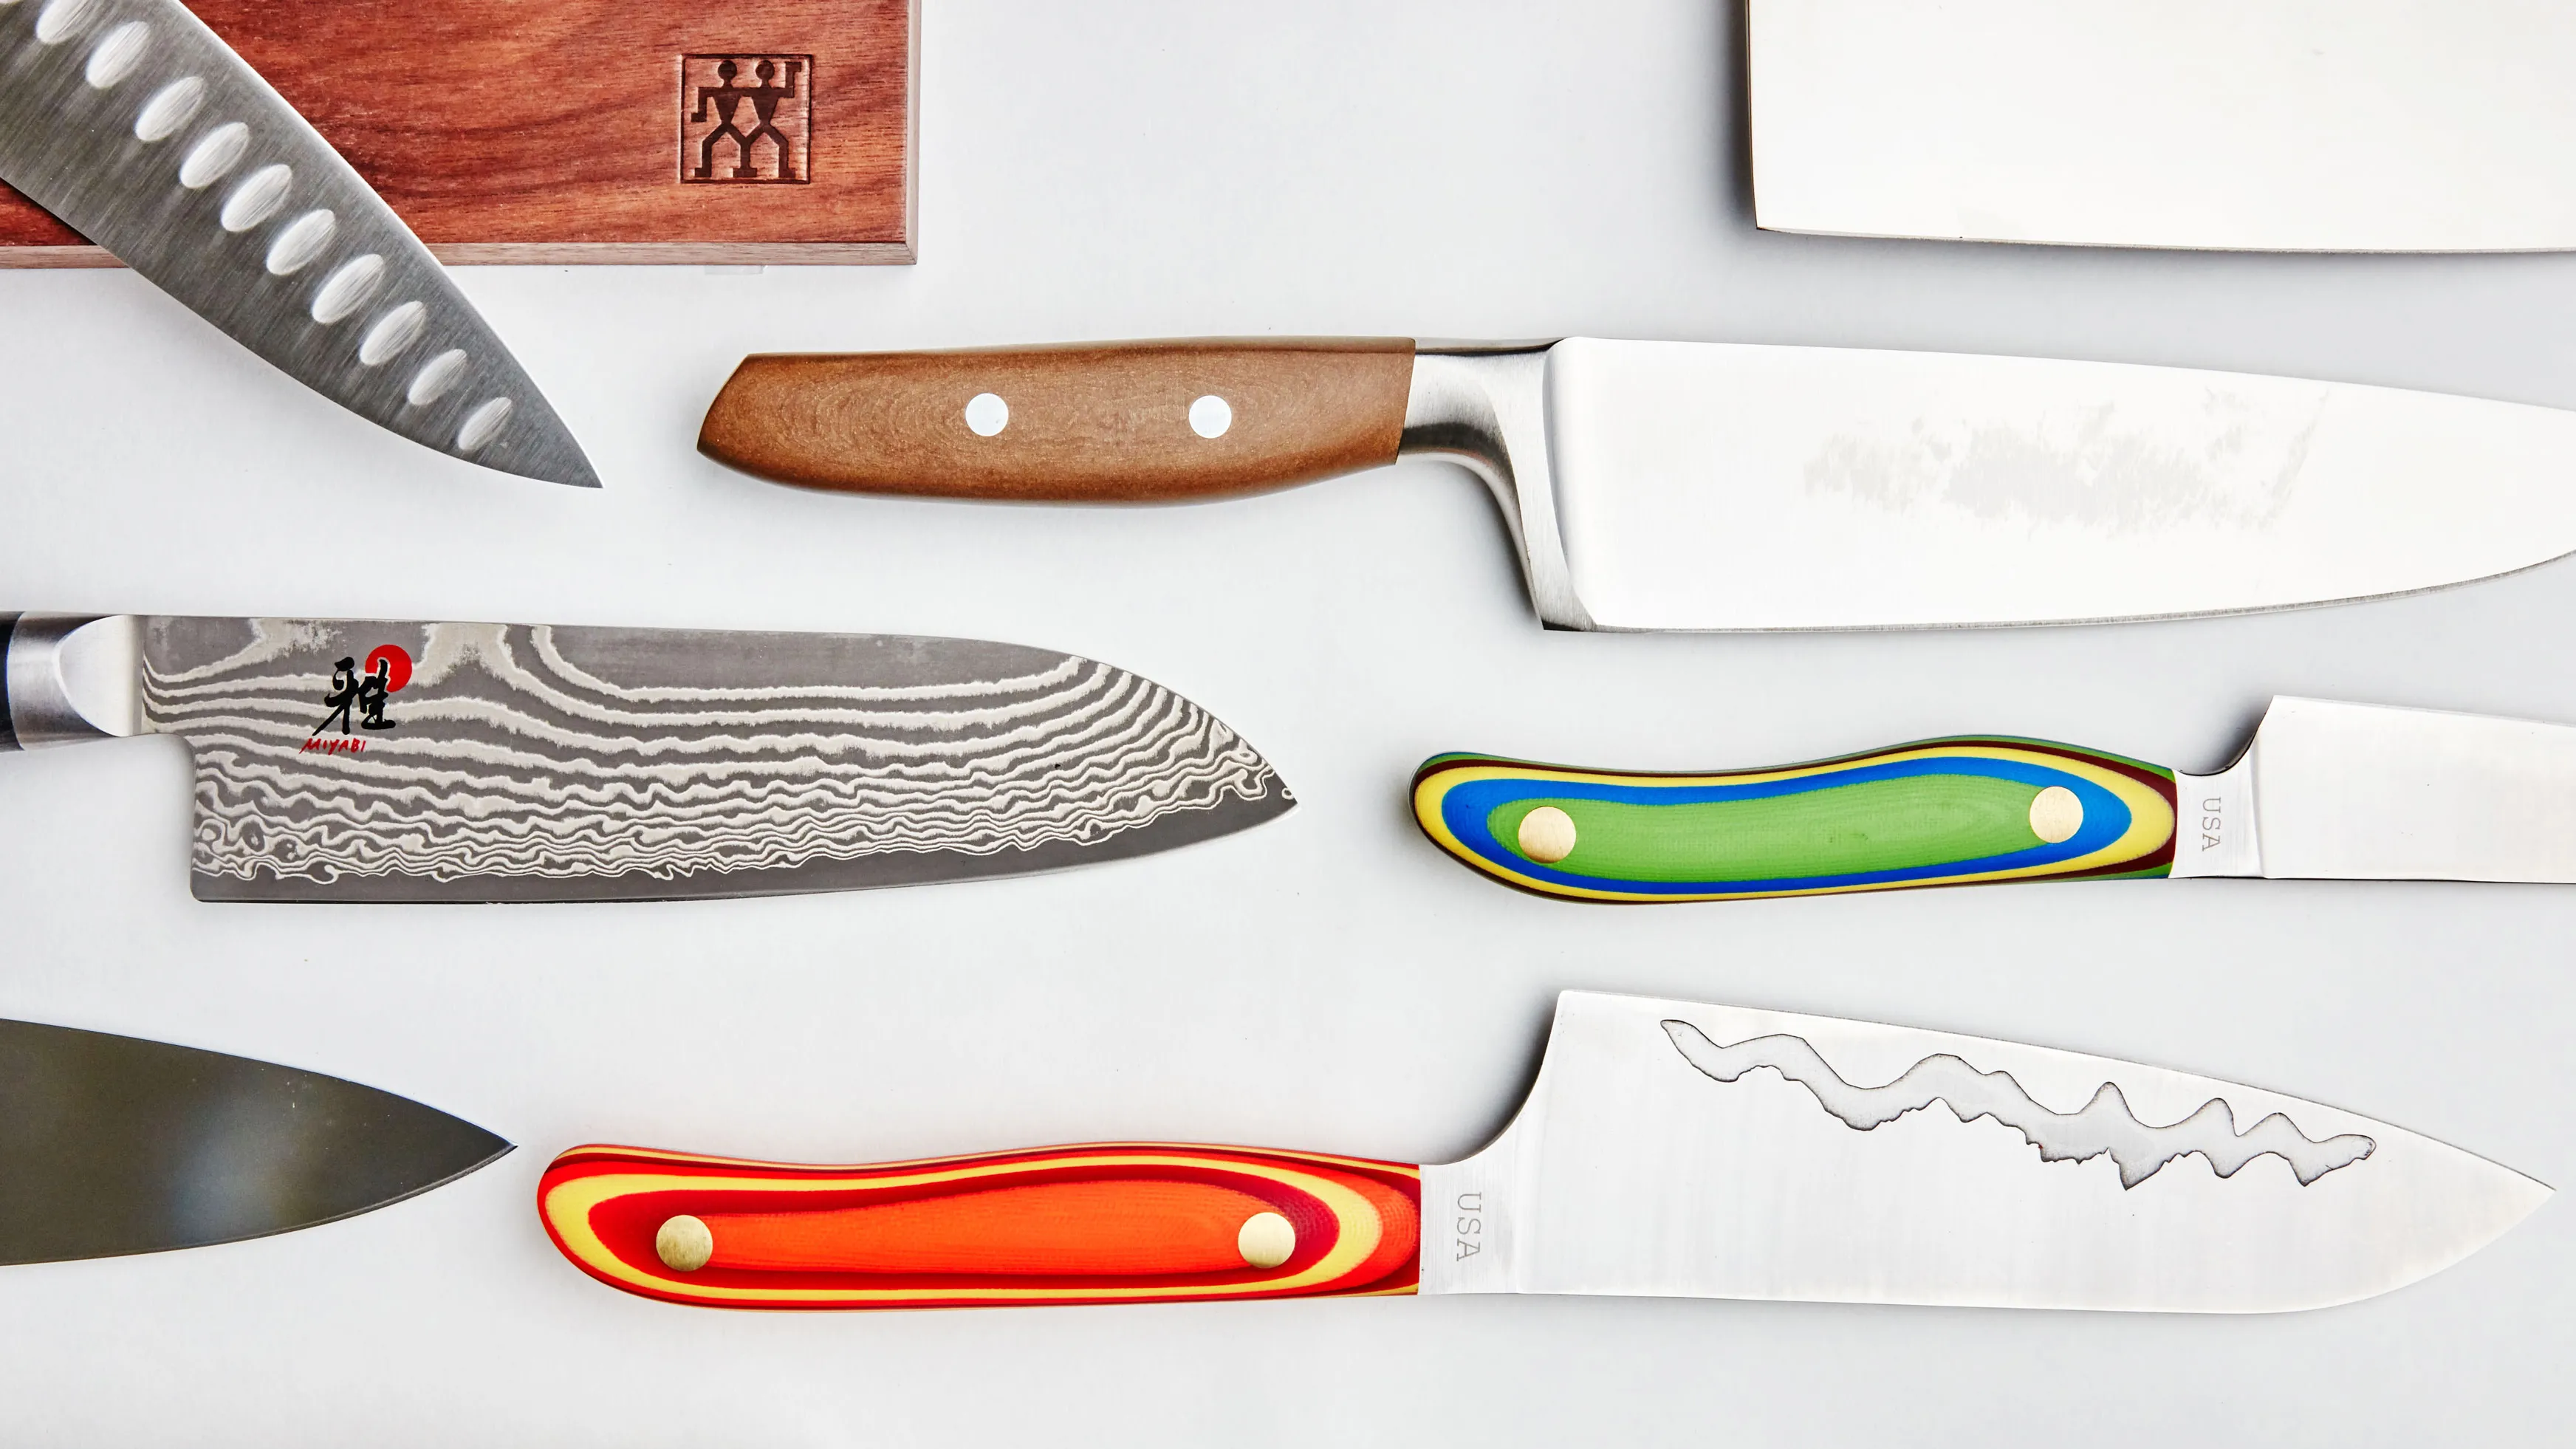 The Knife Shop: A Must-Visit for All Knife Enthusiasts